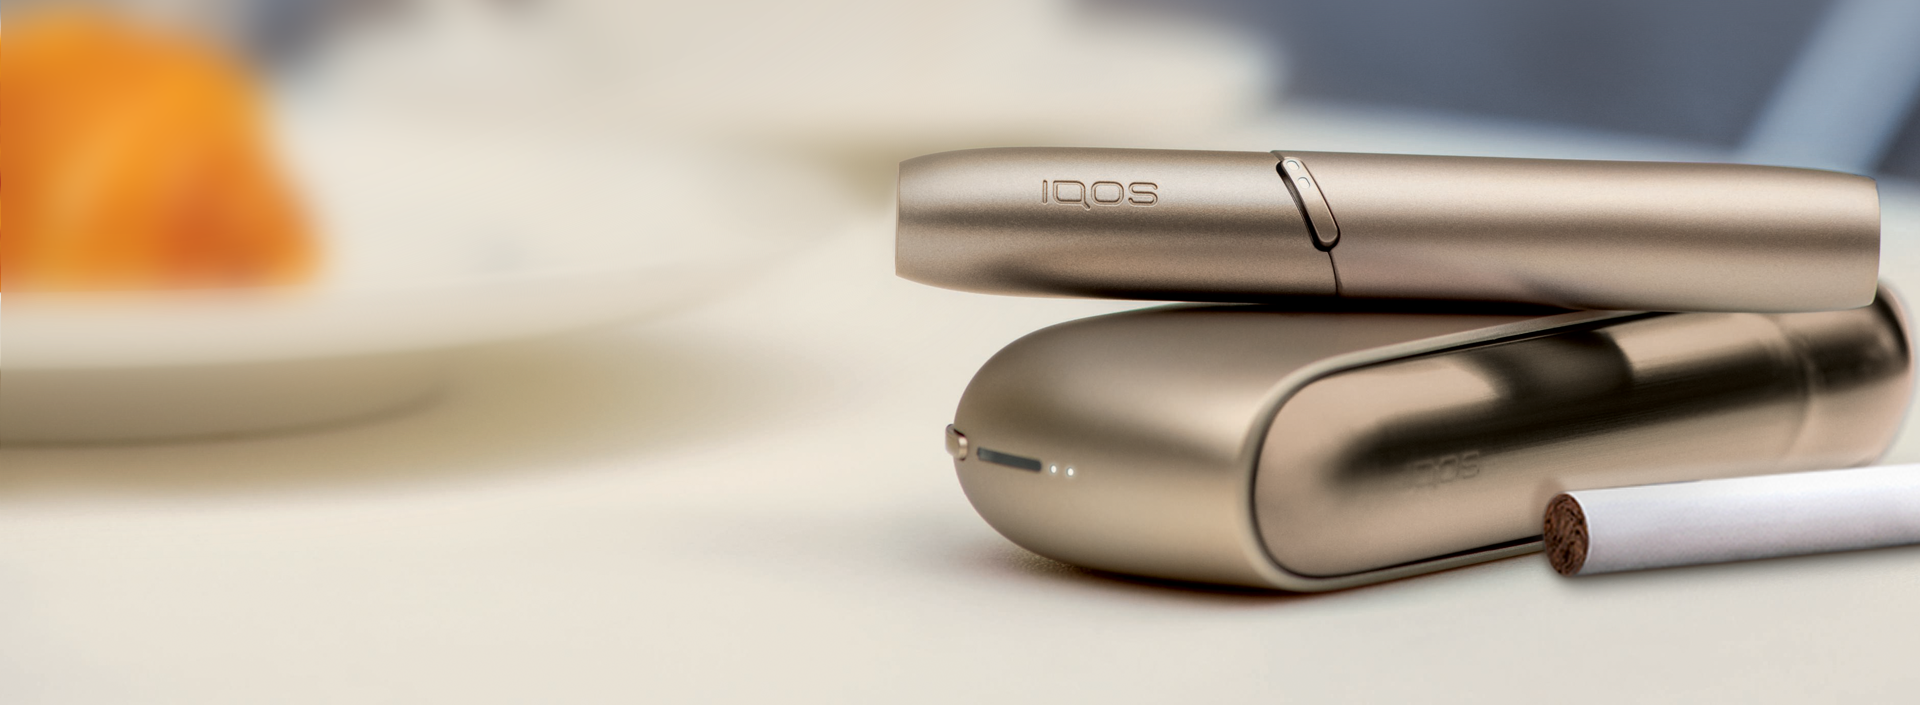 What do the Lights on IQOS Mean?